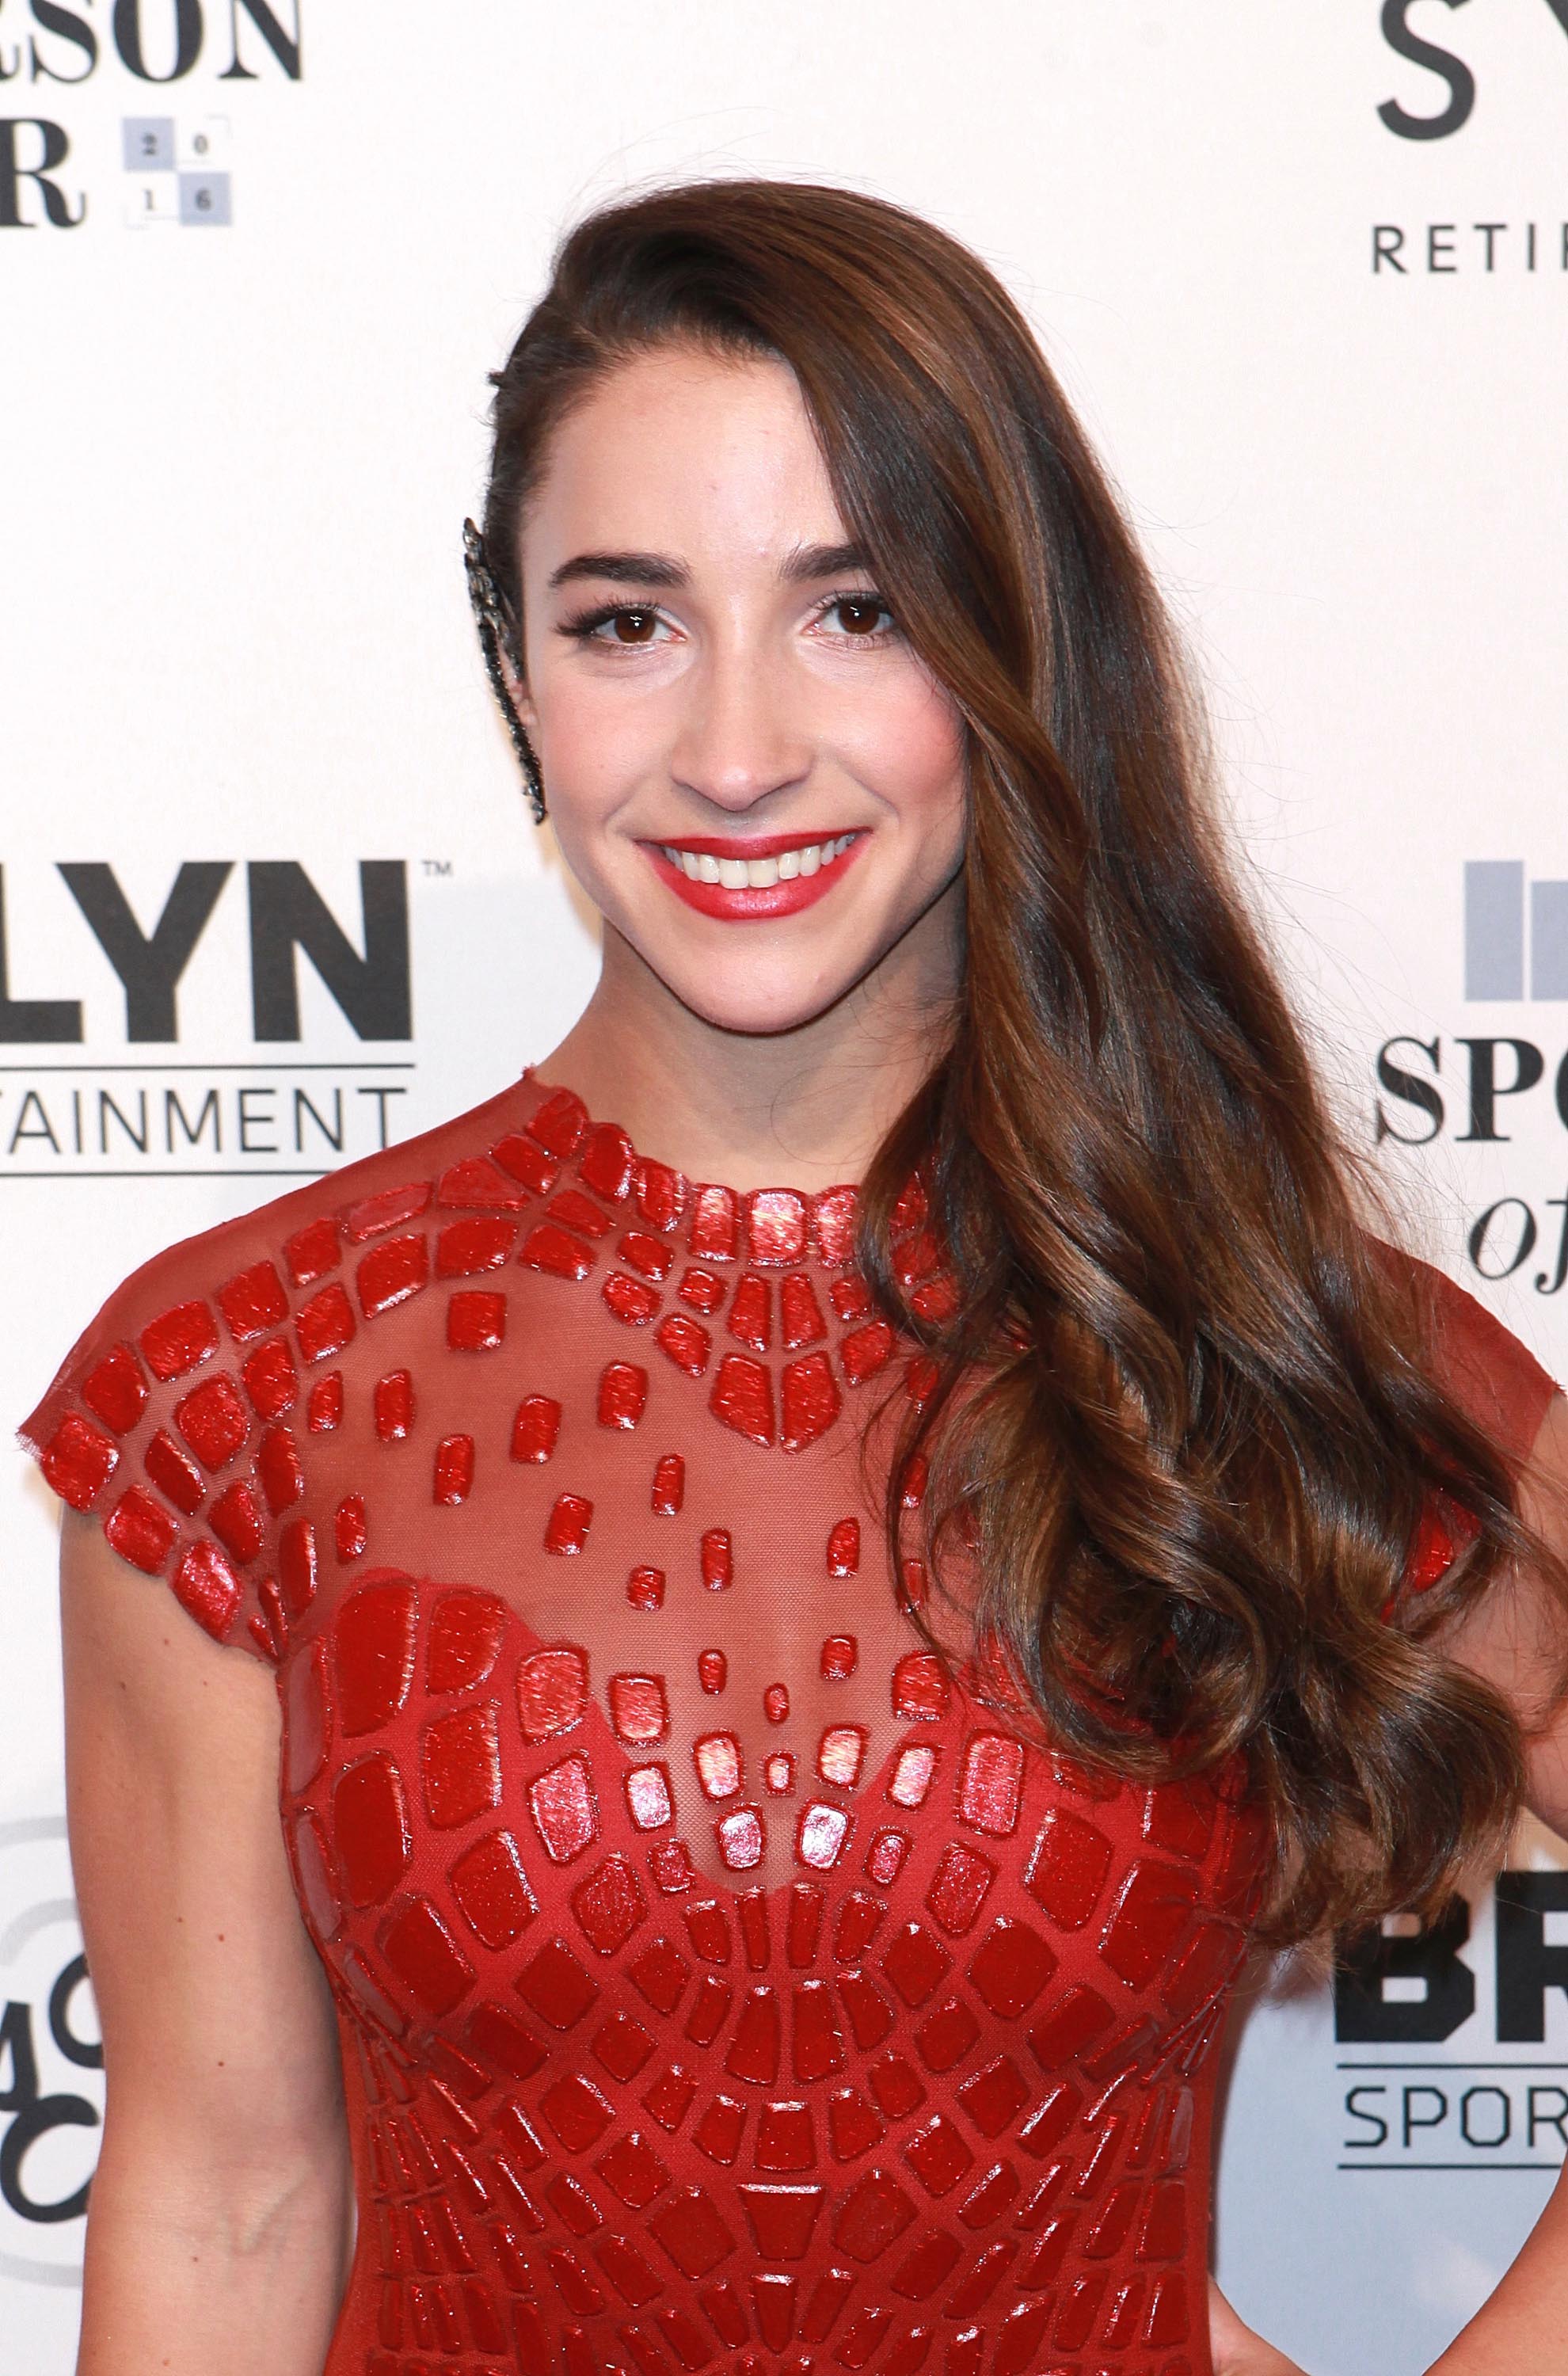 Aly Raisman attends Sports Illustrated Sportsperson of the Year 2016